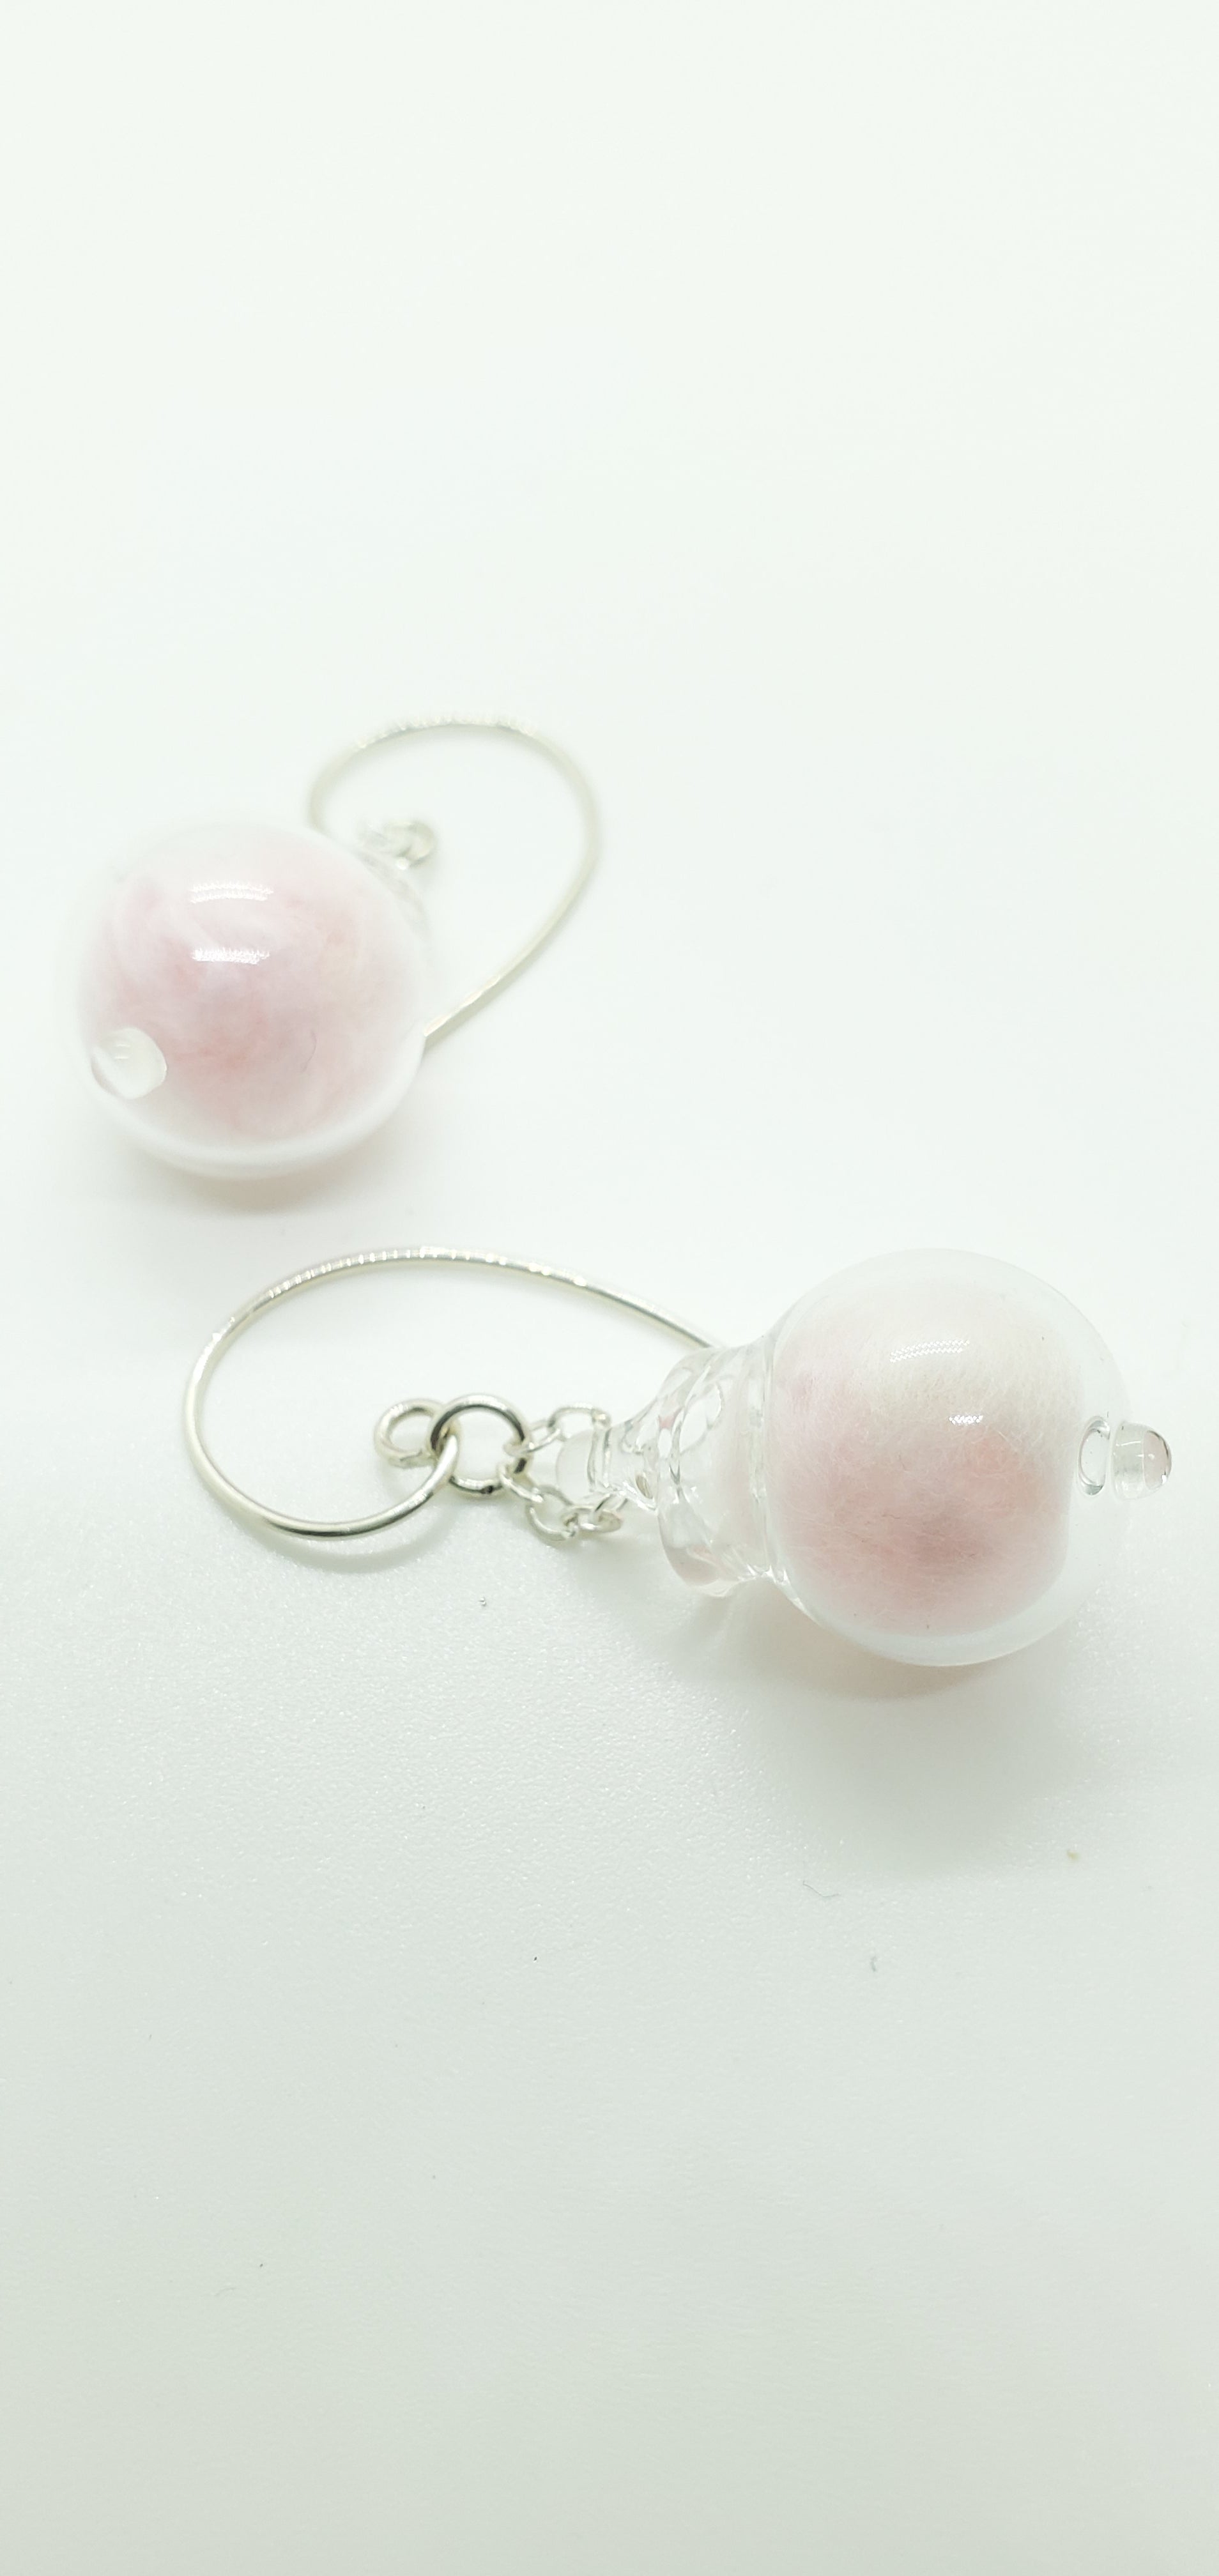 Cotton candy earrings